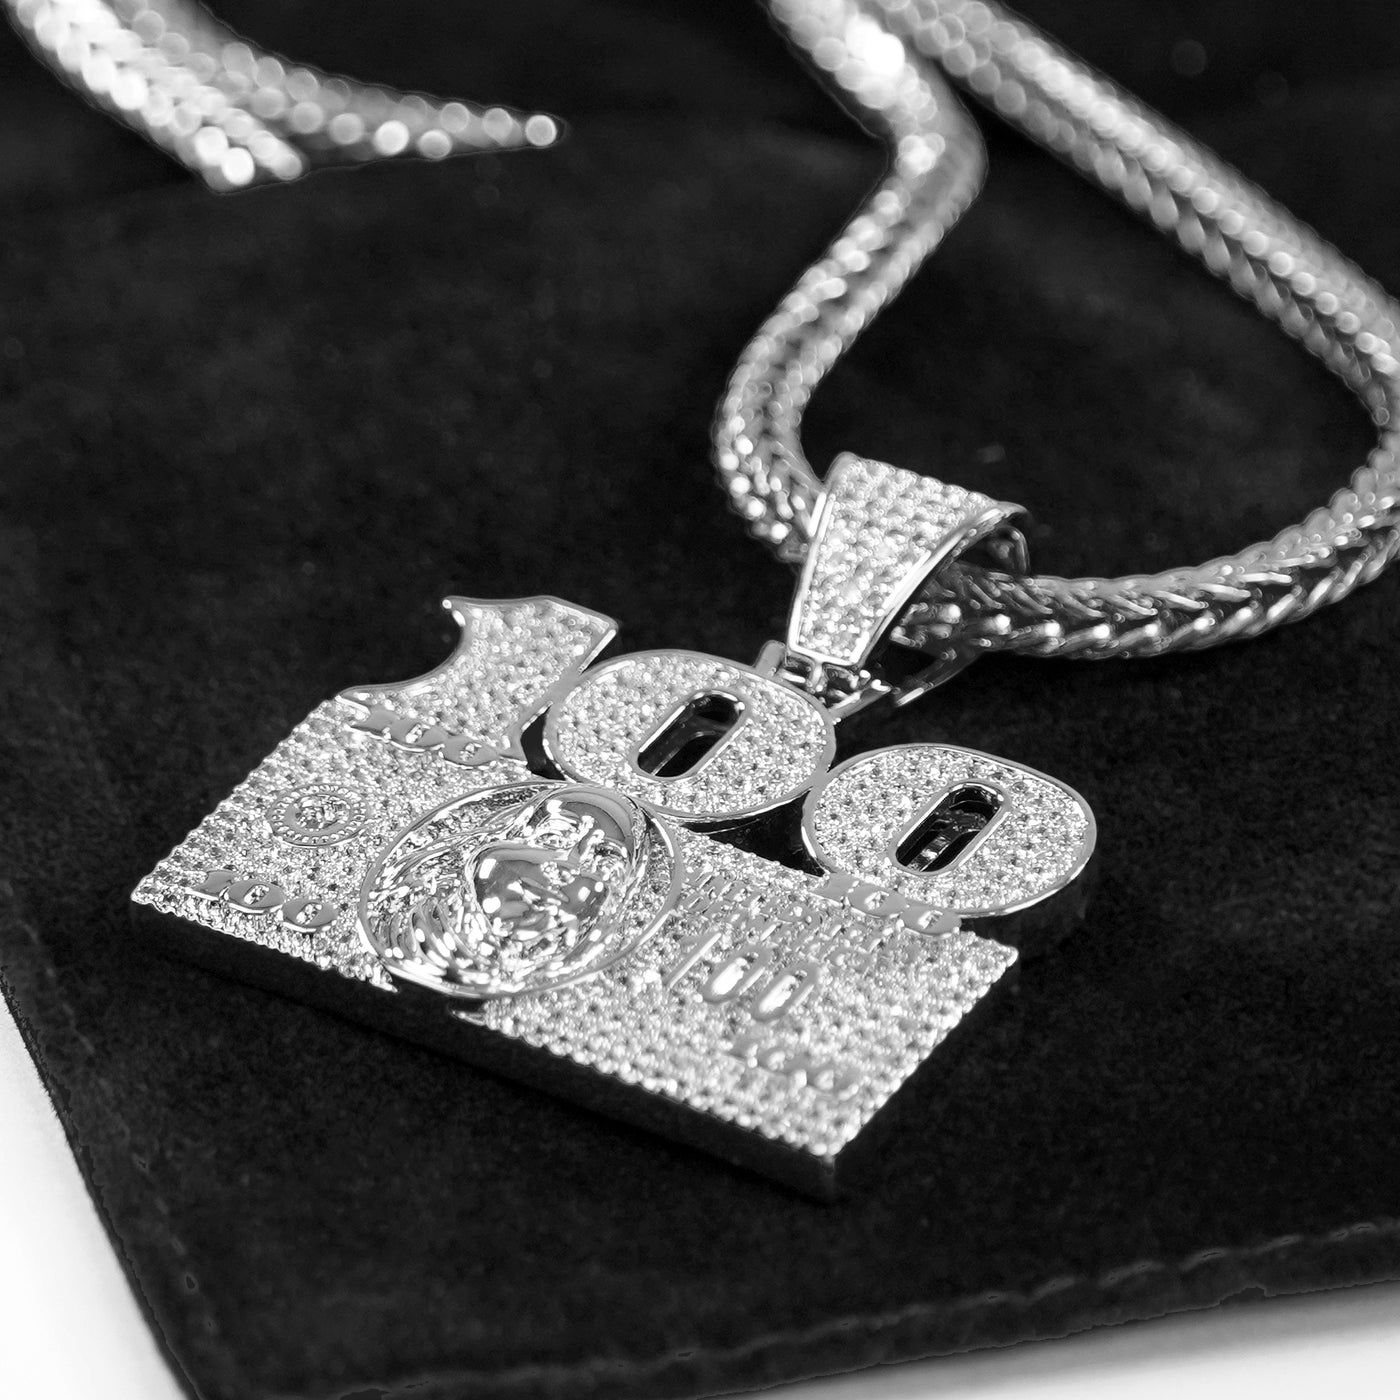 100 Money Benjamin 1½" Pendant with Chain Necklace - Stainless Steel